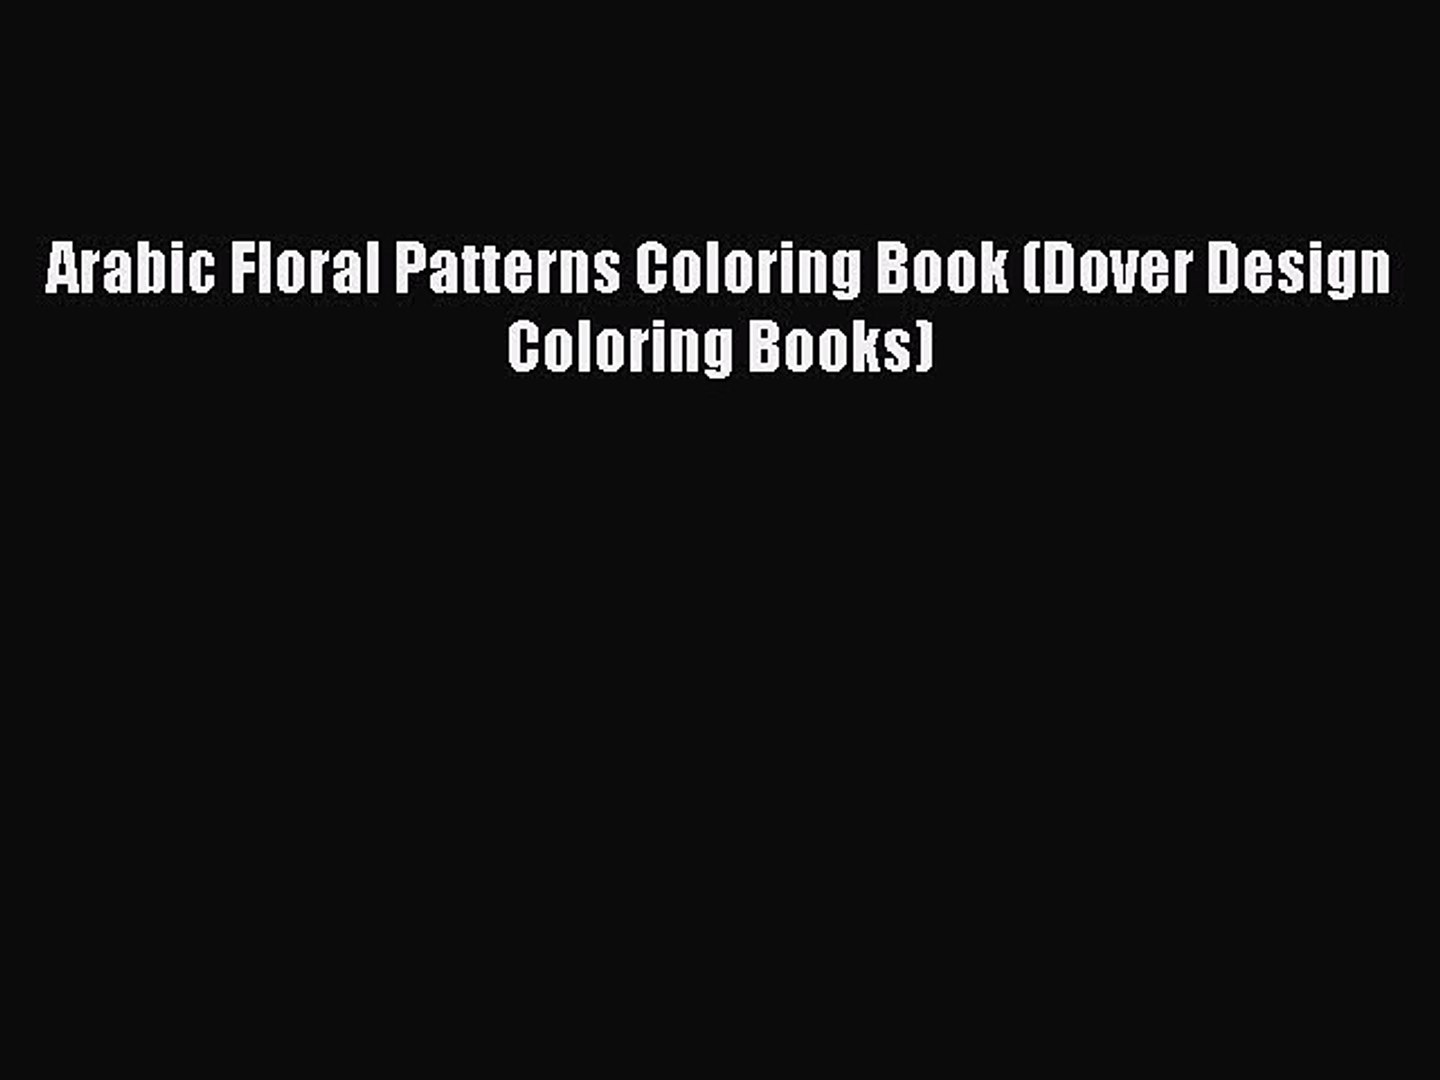 Read Arabic Floral Patterns Coloring Book (Dover Design Coloring Books) Ebook Free